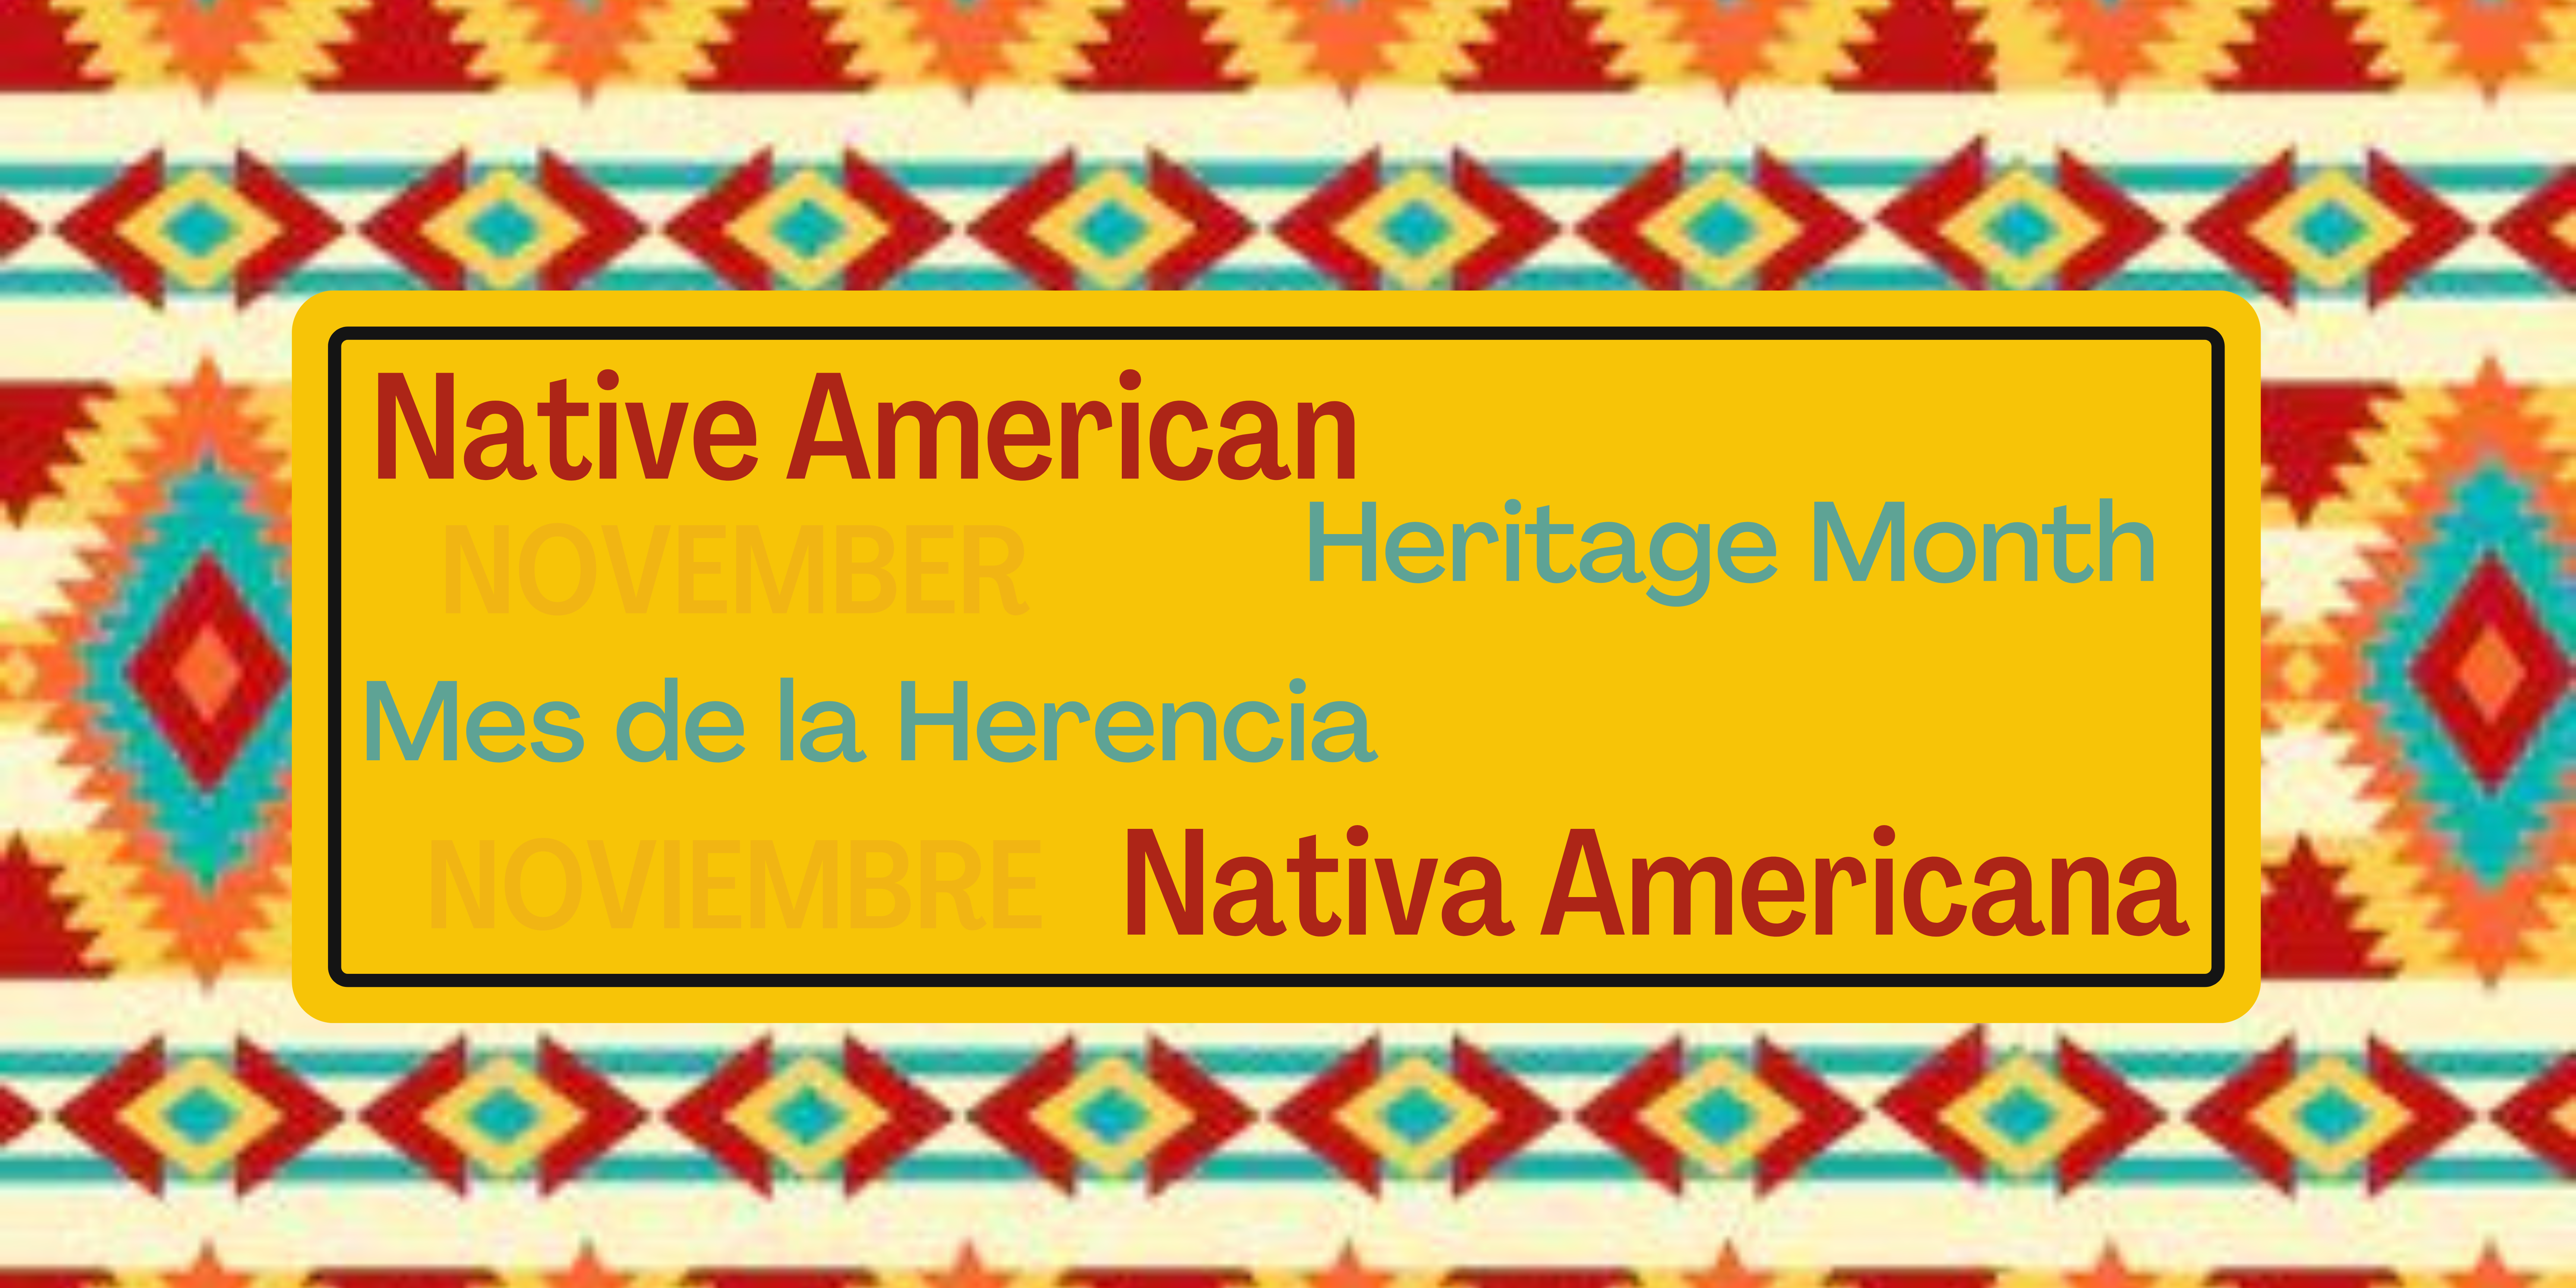 Red text says "Native American" and blue text says "Heritage Month" against a yellow background over a Native American textile.